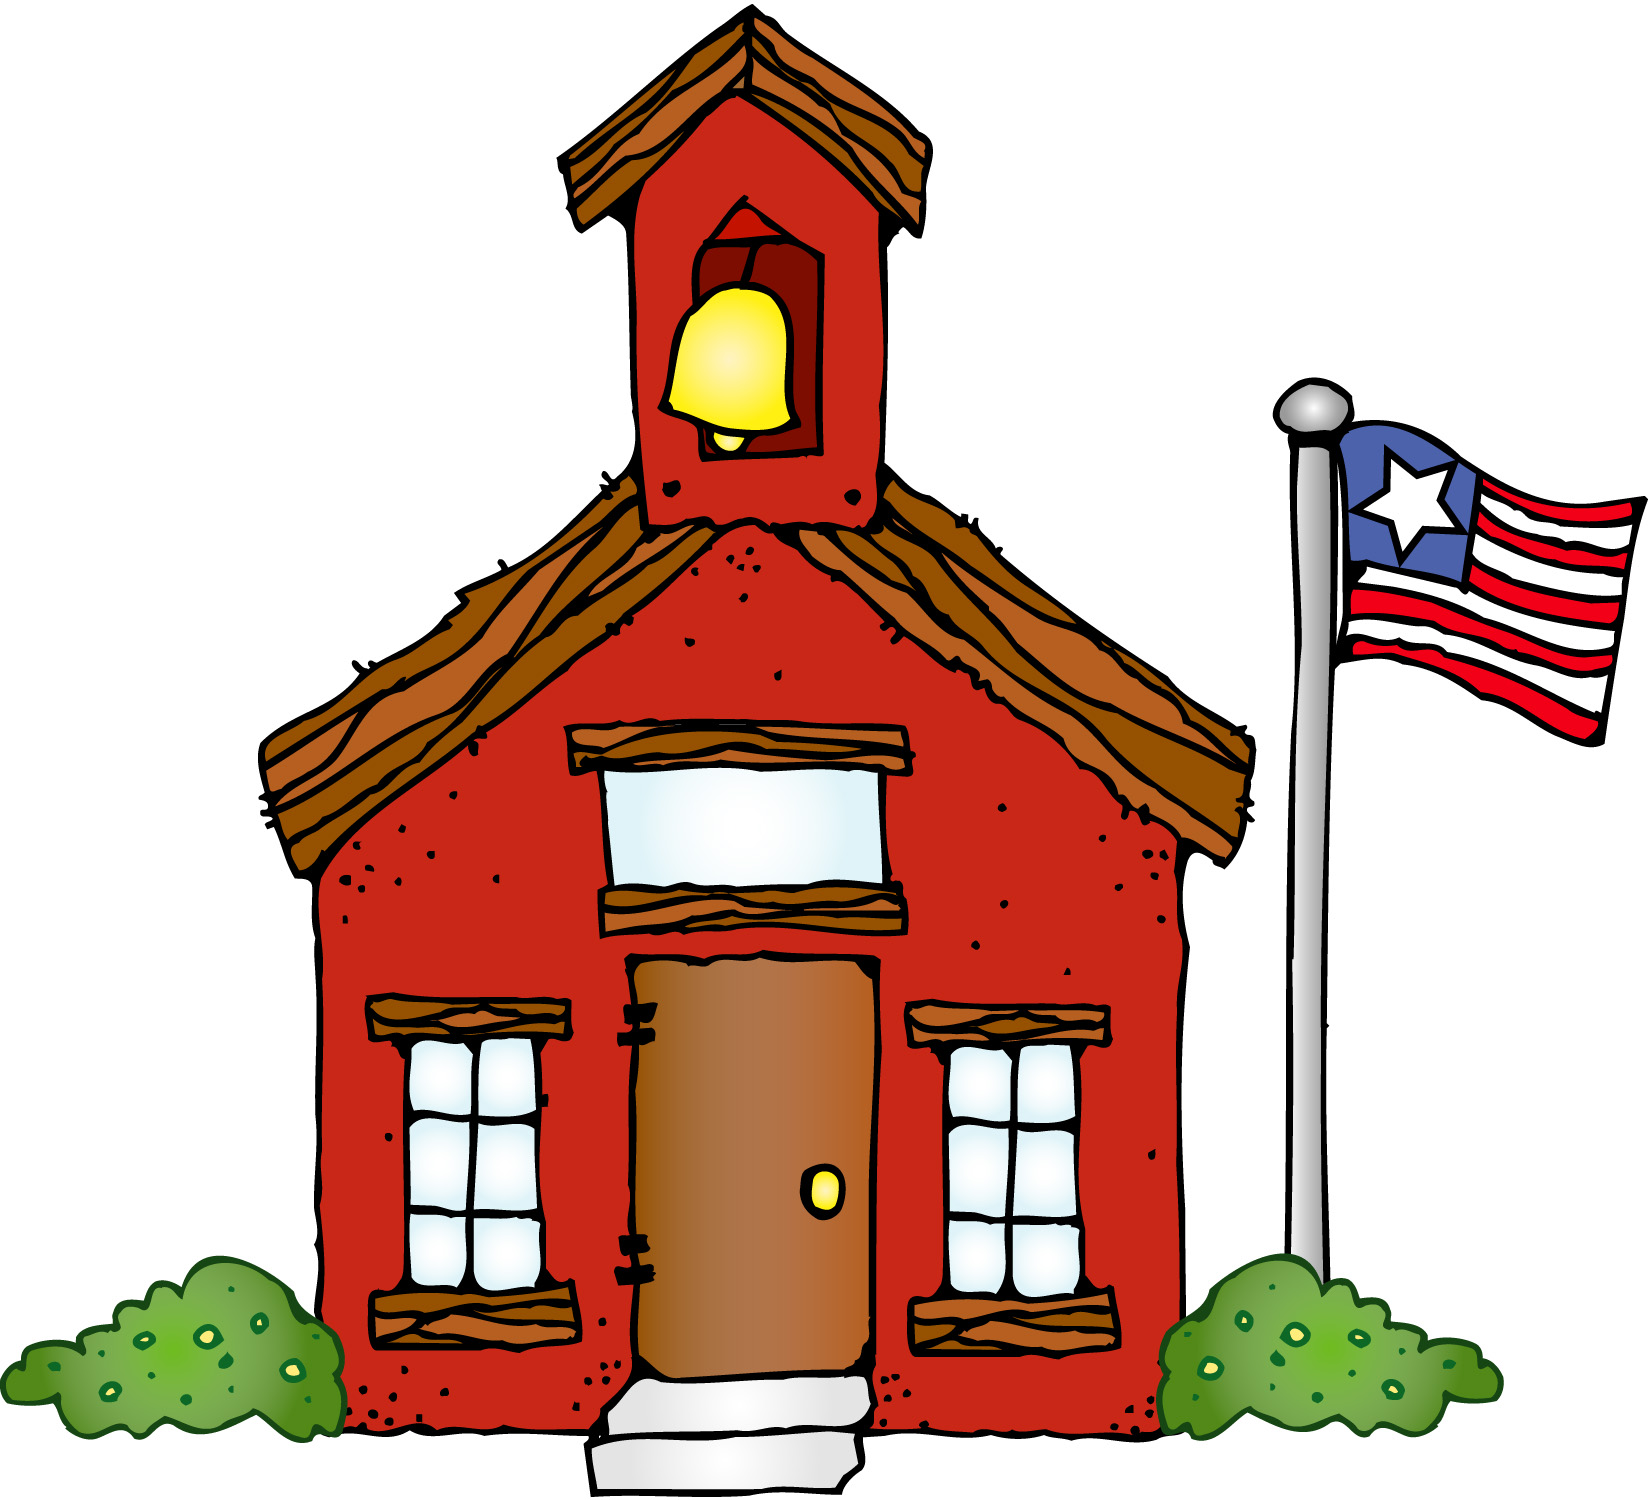 School House Clipart Free   Clipart Panda   Free Clipart Images